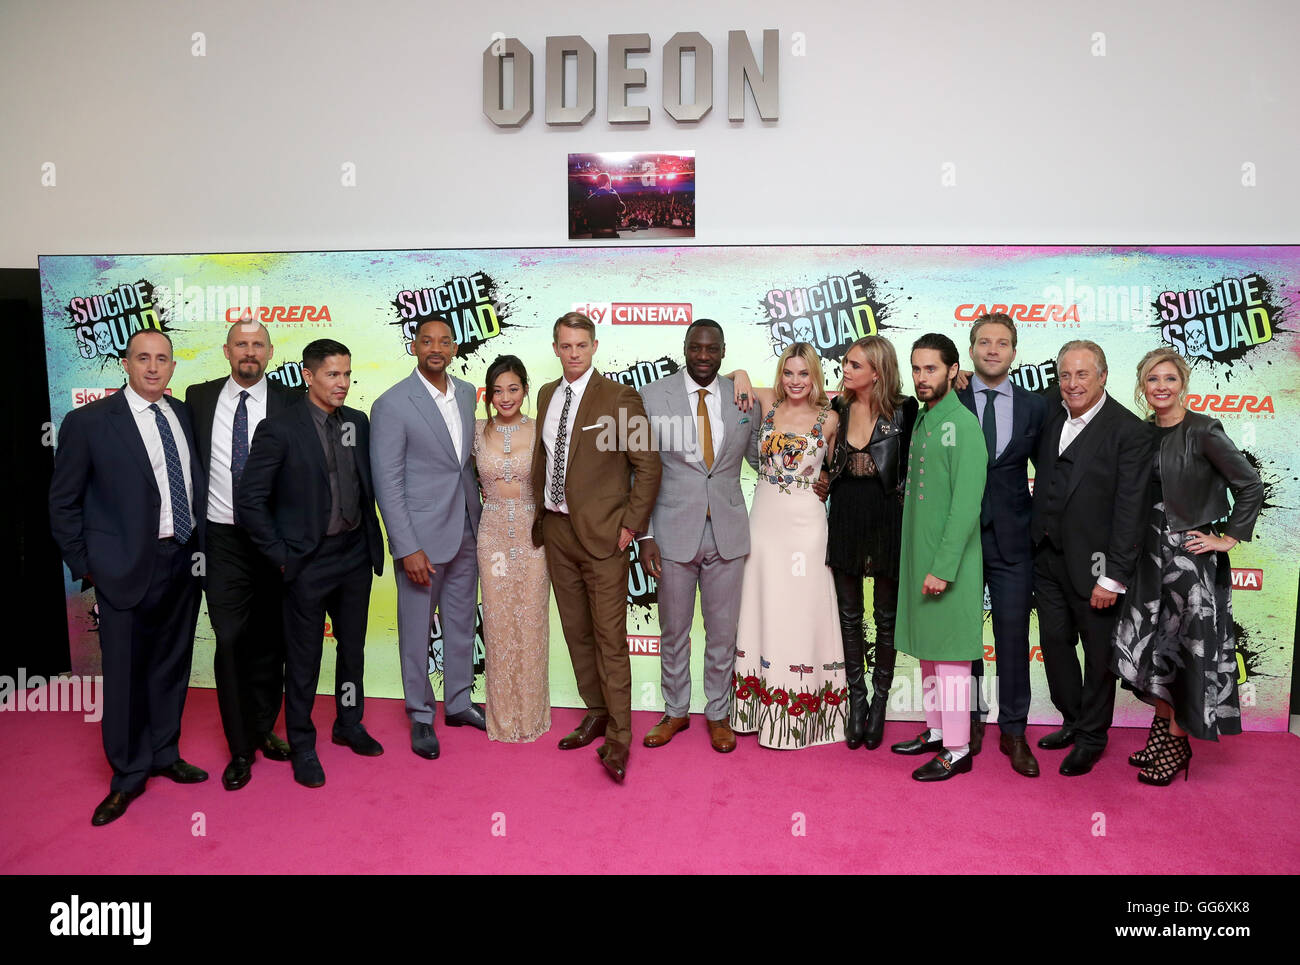 (left to right) Richard Suckle, Director David Ayer, Jay Hernandez, Will Smith, Karen Fukuhara, Joel Kinnaman, Adewale Akinnuoye-Agbaje, Margot Robbie, Cara Delevingne, Jai Courtney, Jared Leto, Charles Roven and wife Stephanie Haymes arriving for the Suicide Squad European Premiere, at the Odeon Leicester Square, London. PRESS ASSOCIATION Photo. Picture date: Wednesday August 3, 2016. See PA story SHOWBIZ Suicide. Photo credit should read: Daniel Leal-Olivas/PA Wire Stock Photo